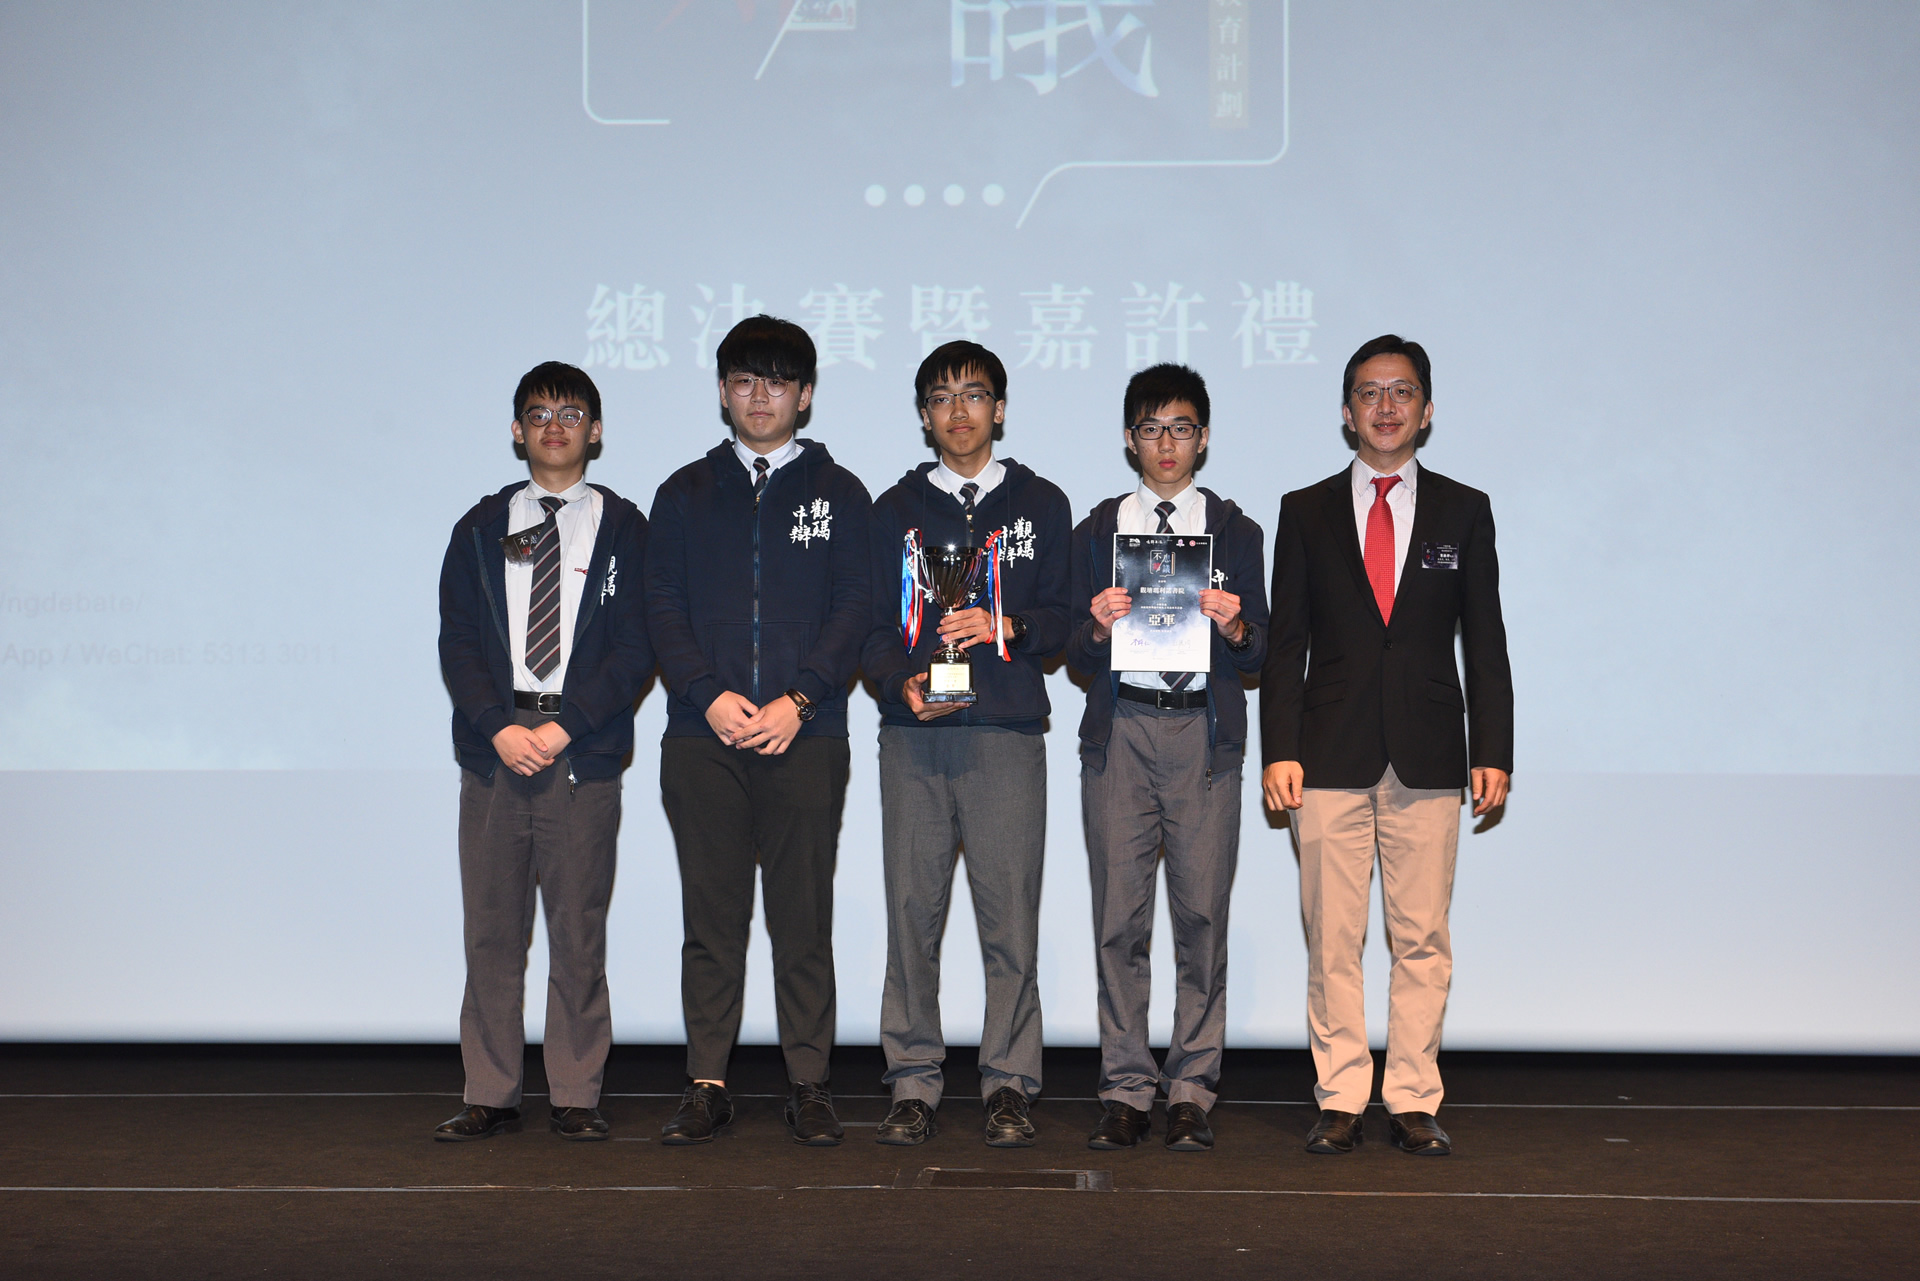 Kwun Tong Maryknoll College grabbed the first runner-up in the final competition.